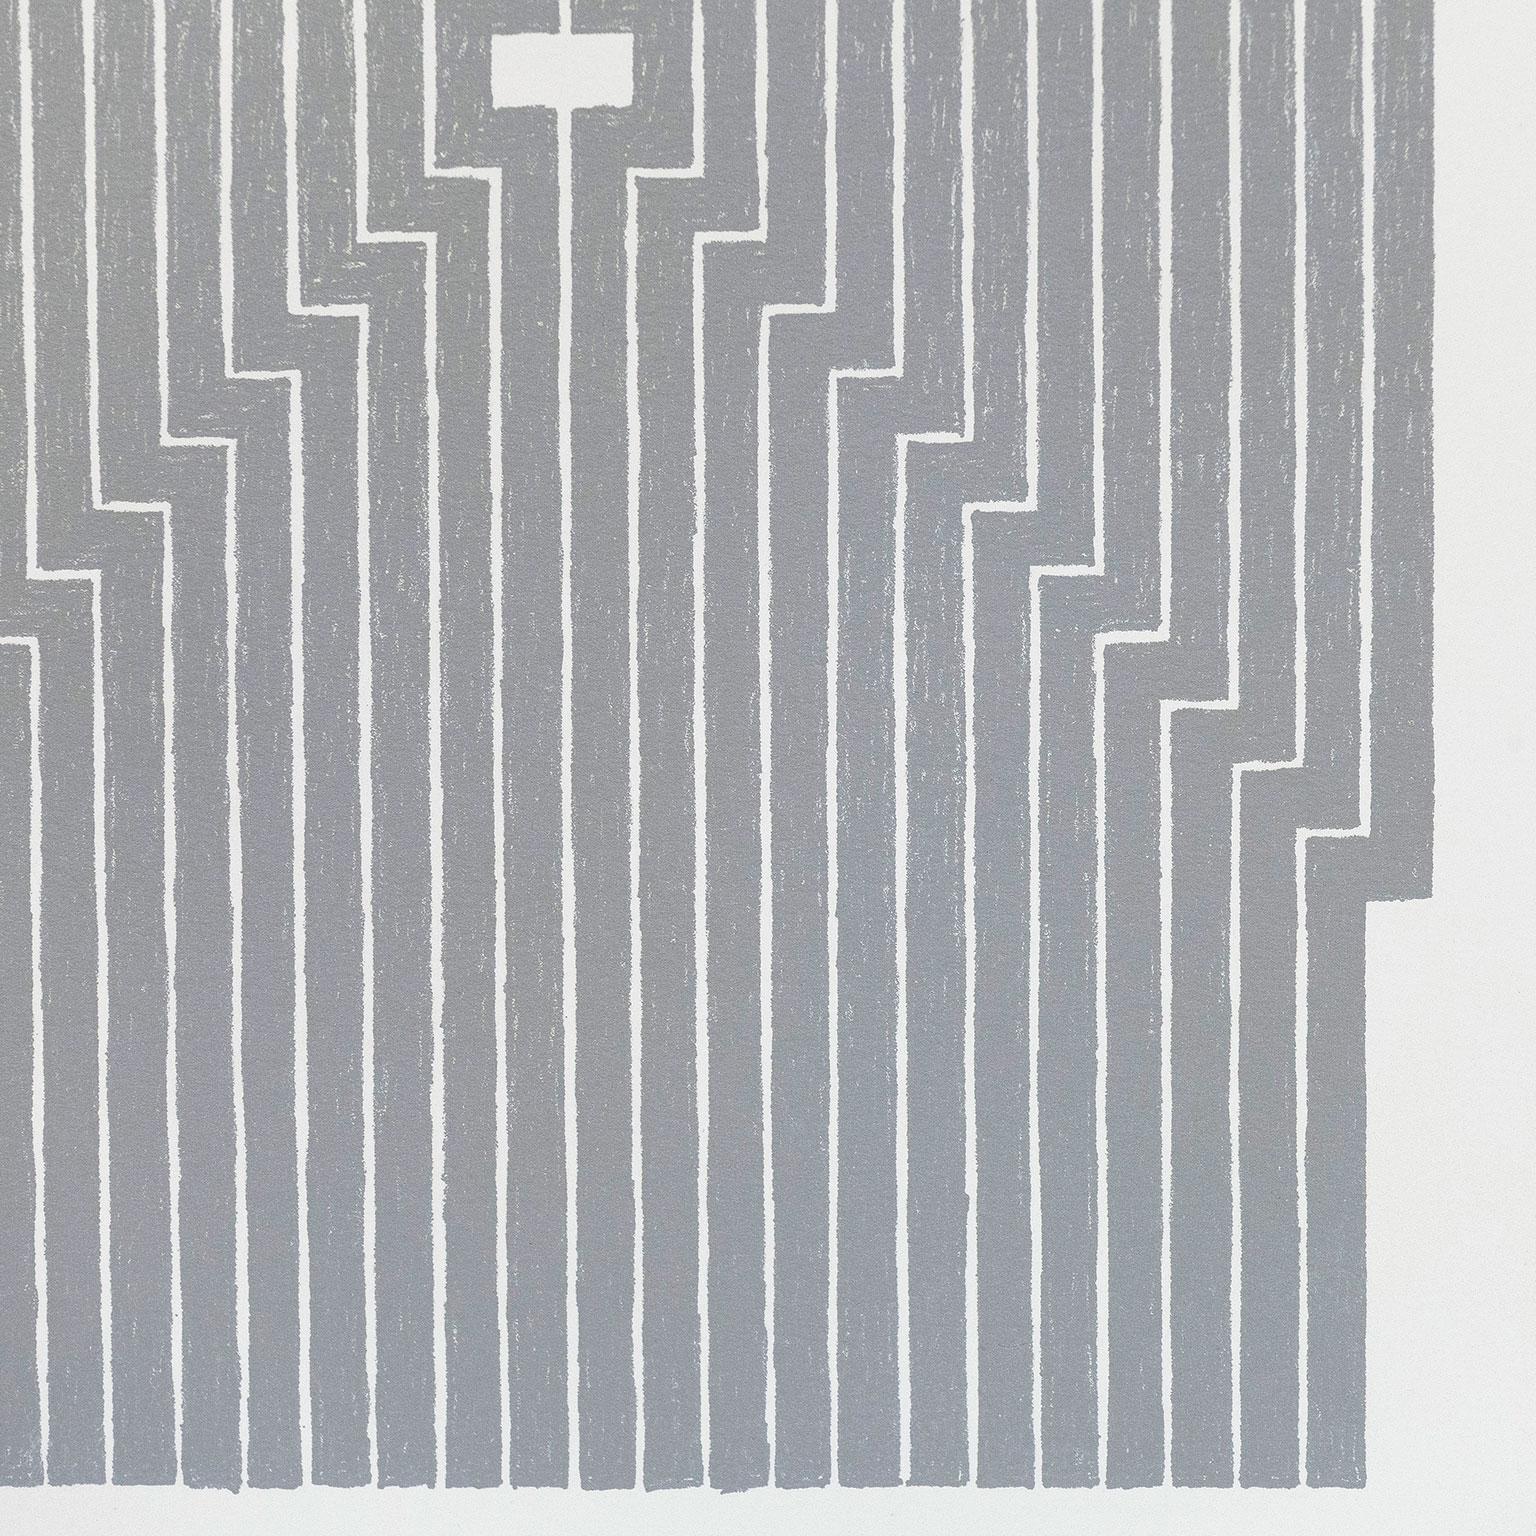 Six Mile Bottom - Gray Abstract Print by Frank Stella